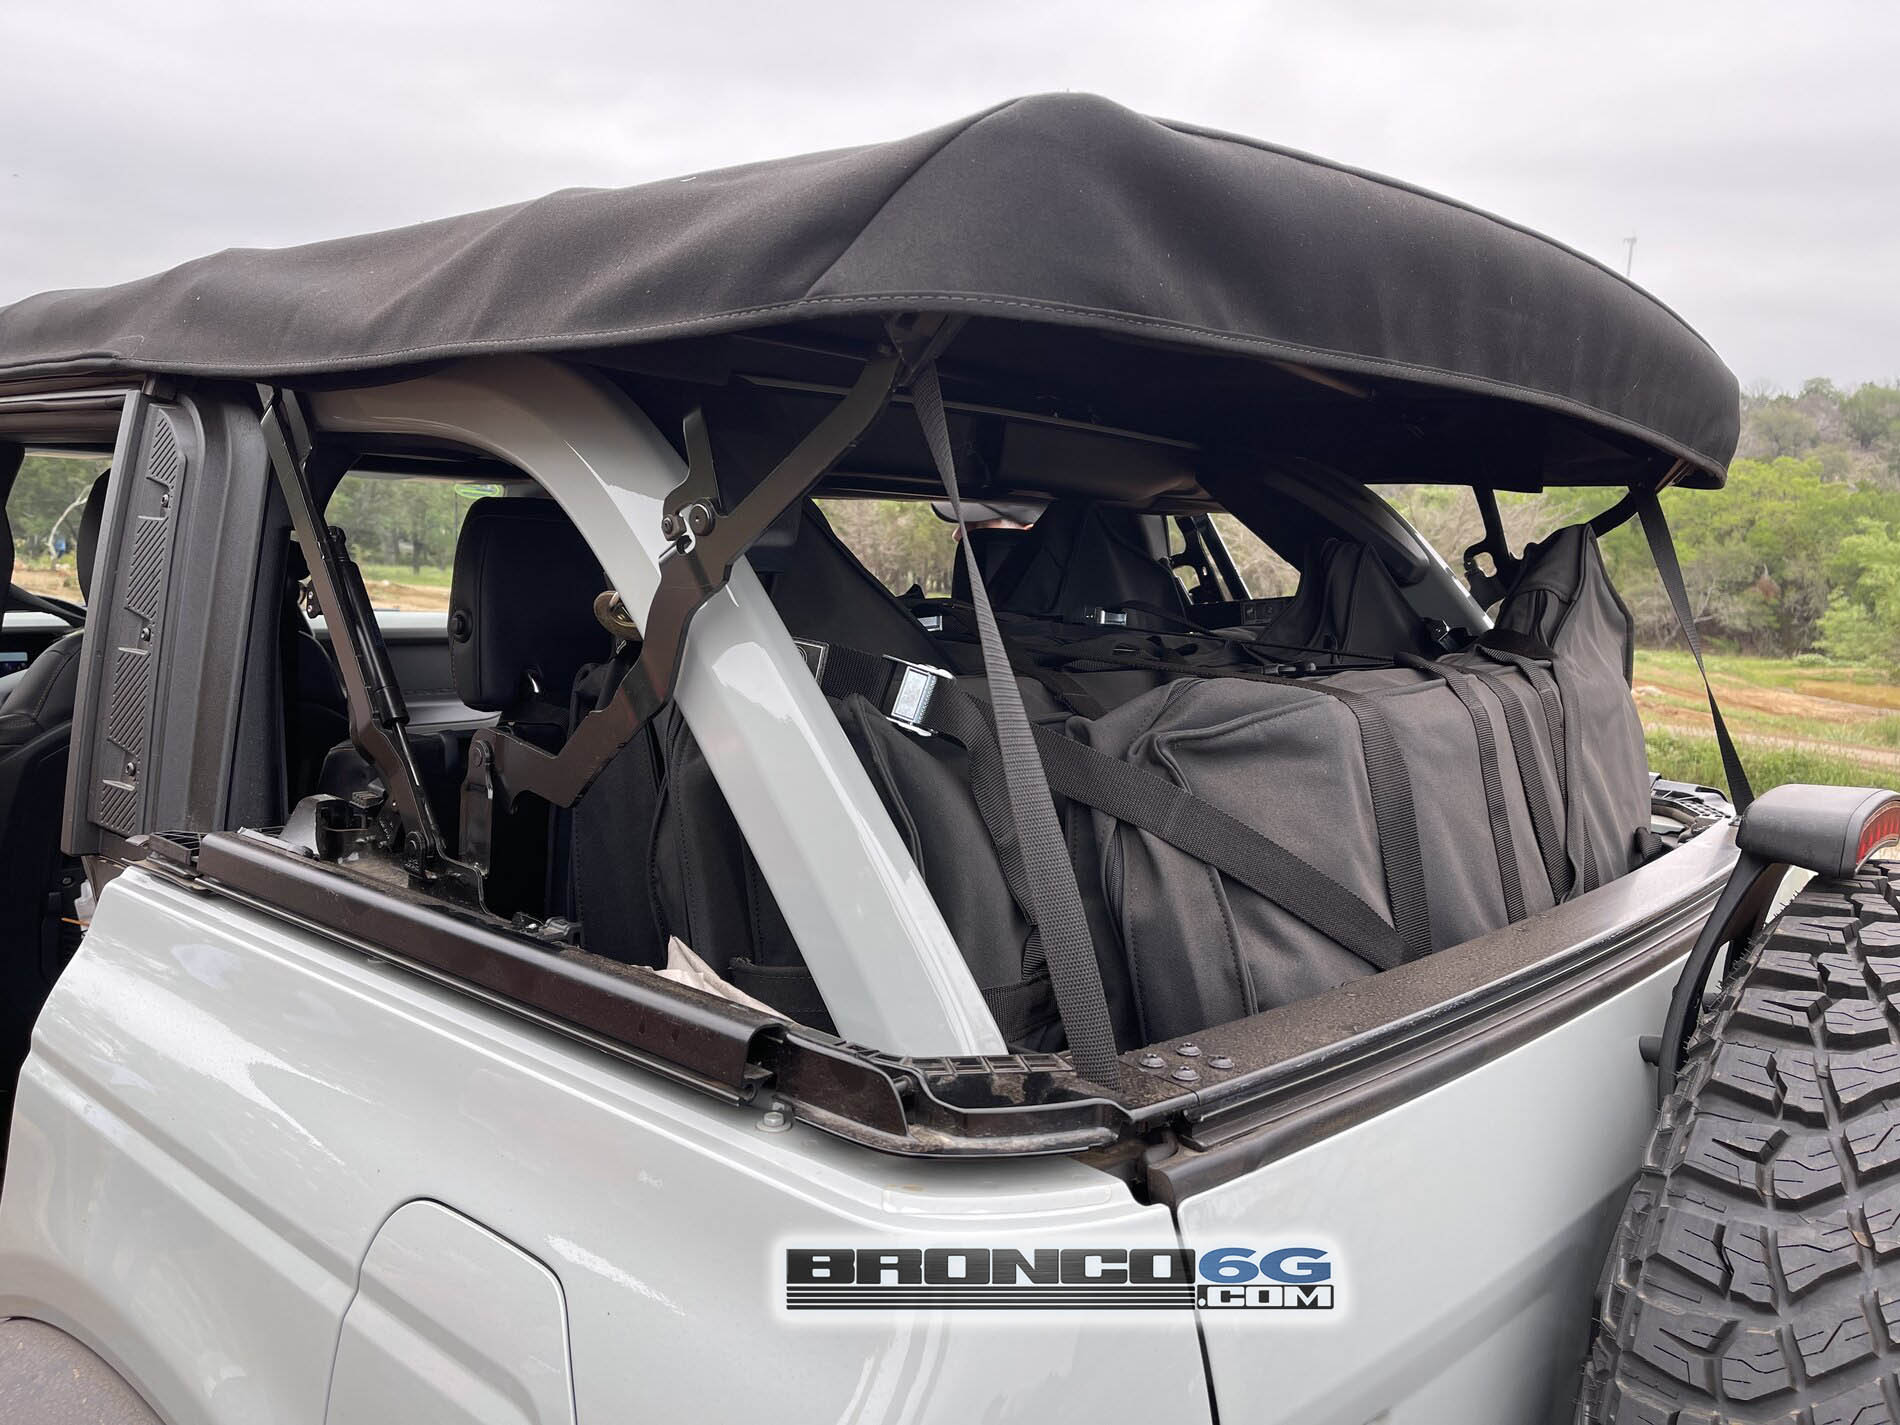 Ford Bronco My experience from Bronco Off-Roadeo Austin dealer preview, with pics & videos 2021 Bronco with doors off, bagged and stored in cargo area.JPG